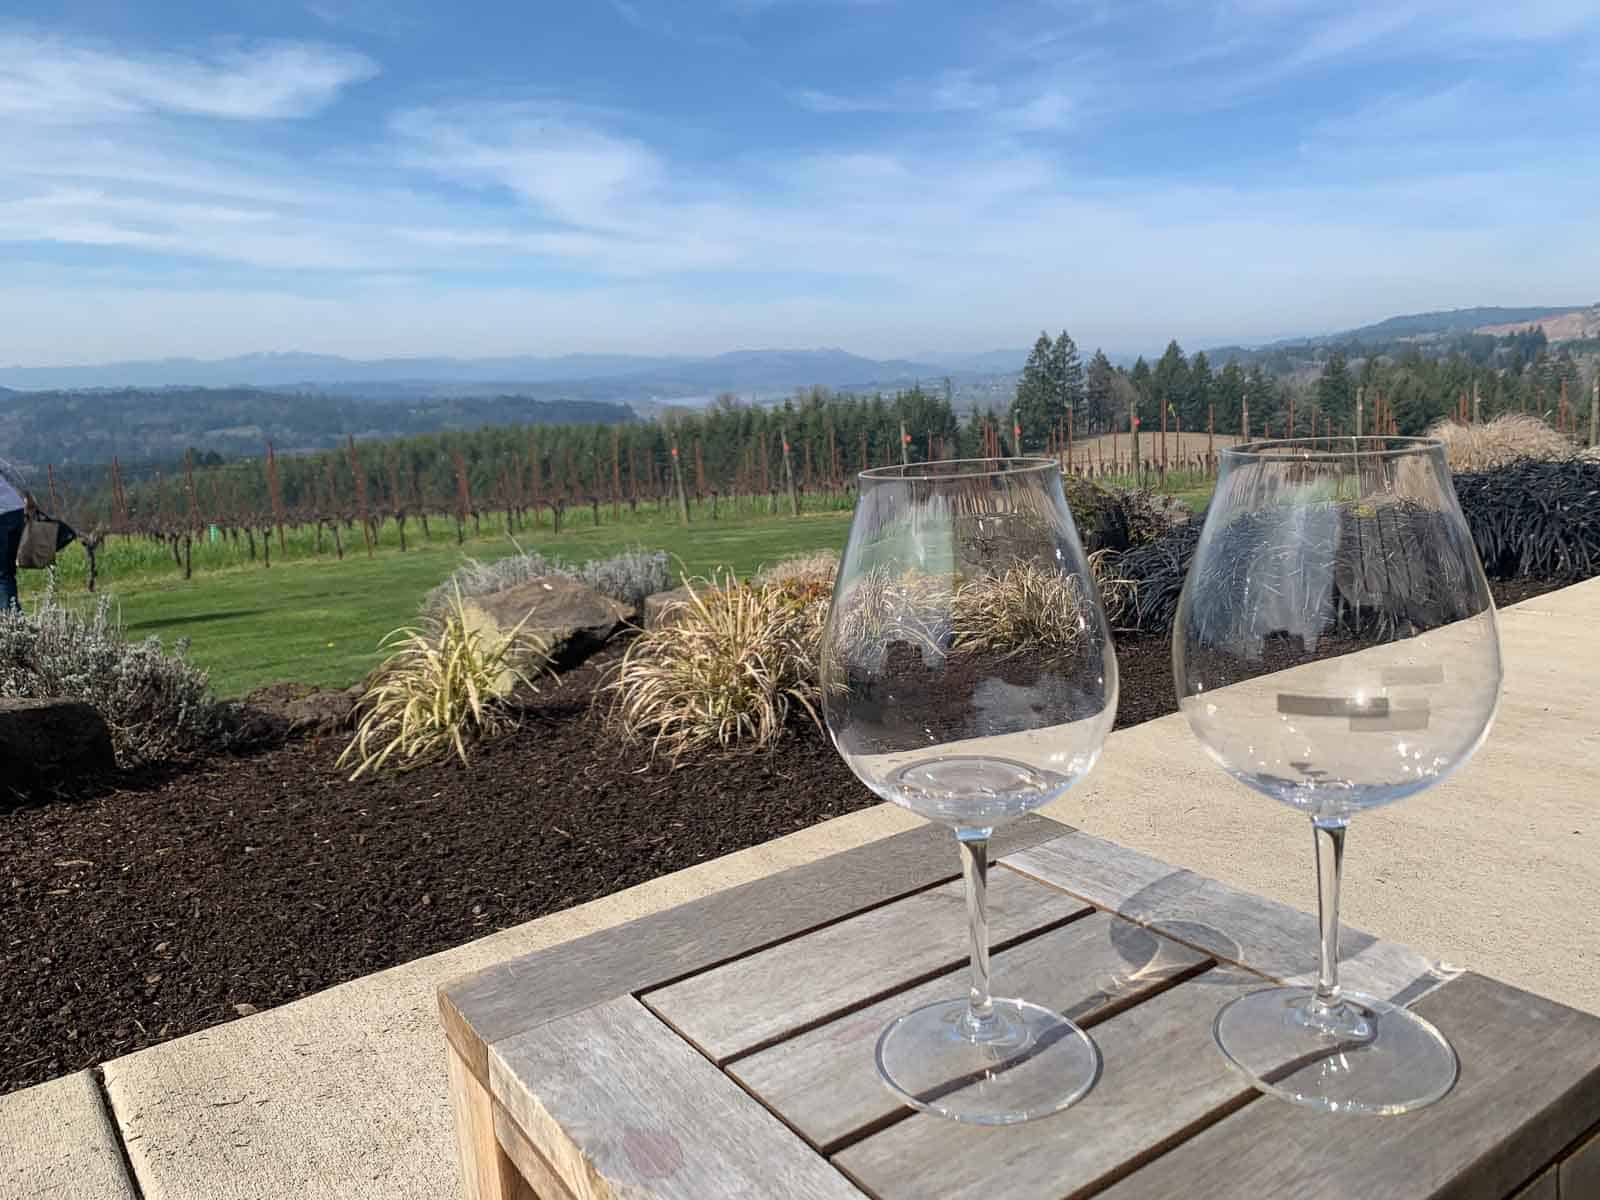 Landcscape view from a winery with mountains in the background and wine glasses up front.